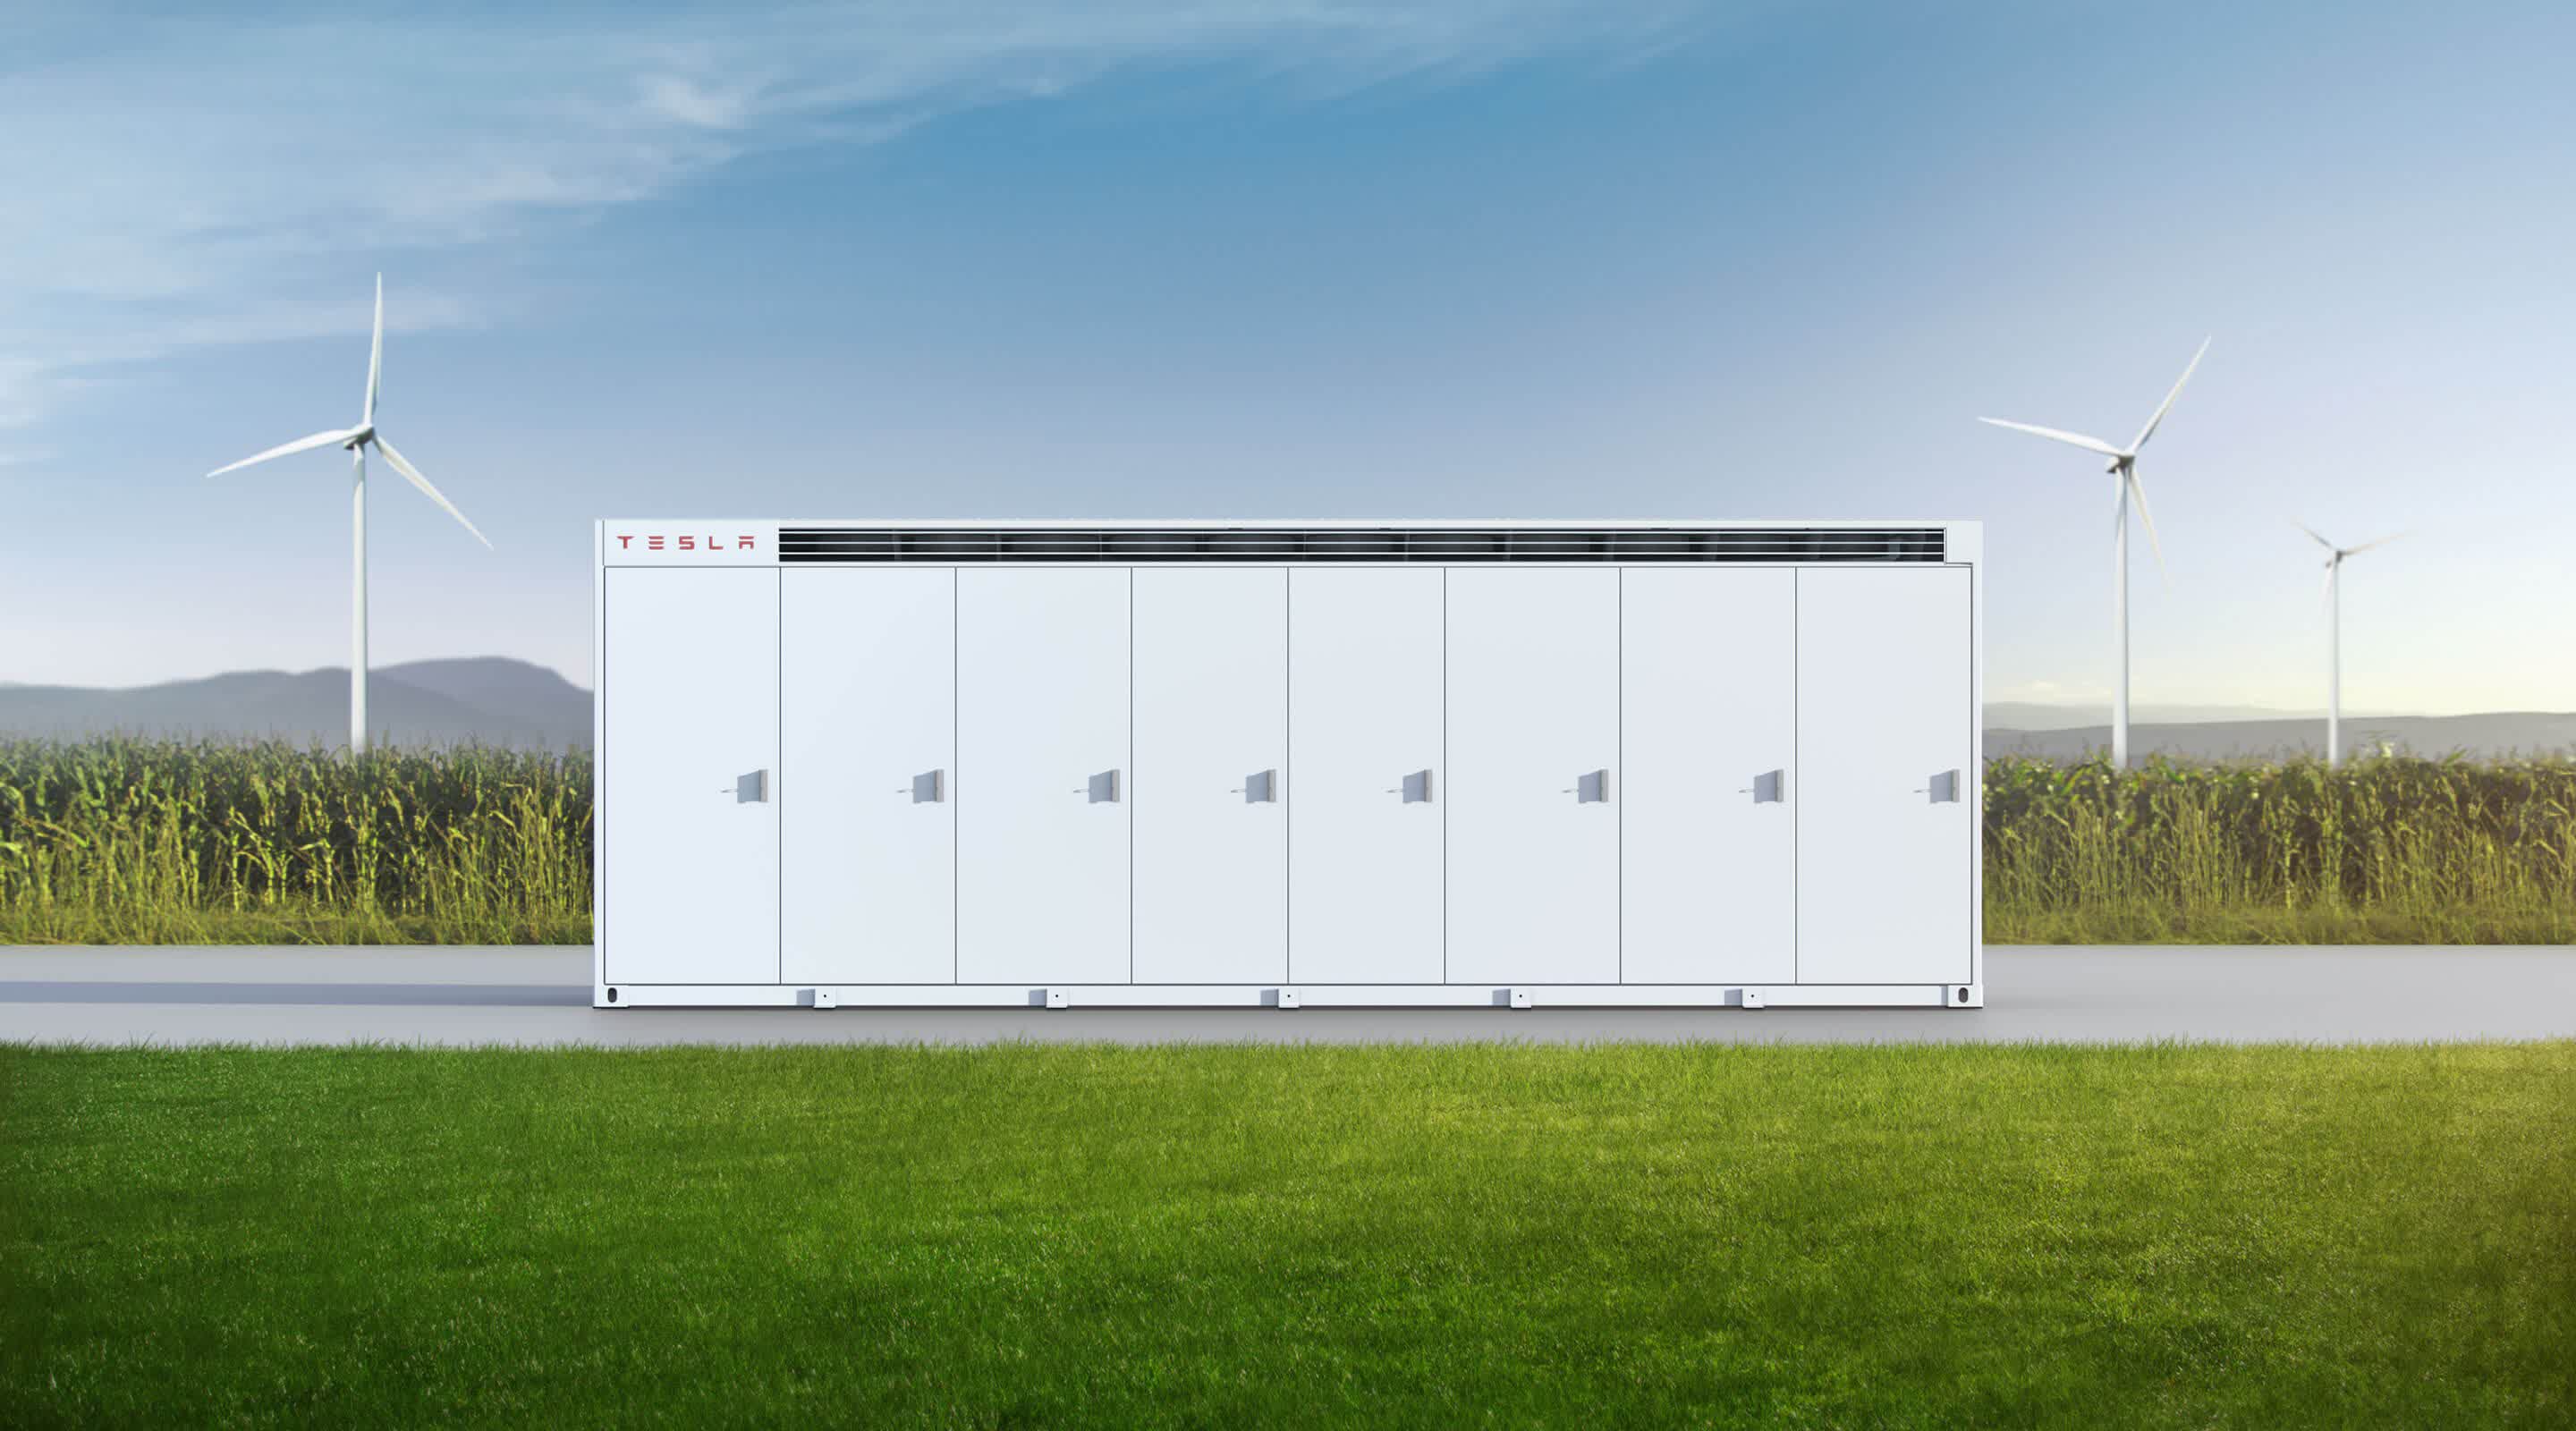 Tesla to reportedly connect massive battery storage to Texas power grid this summer